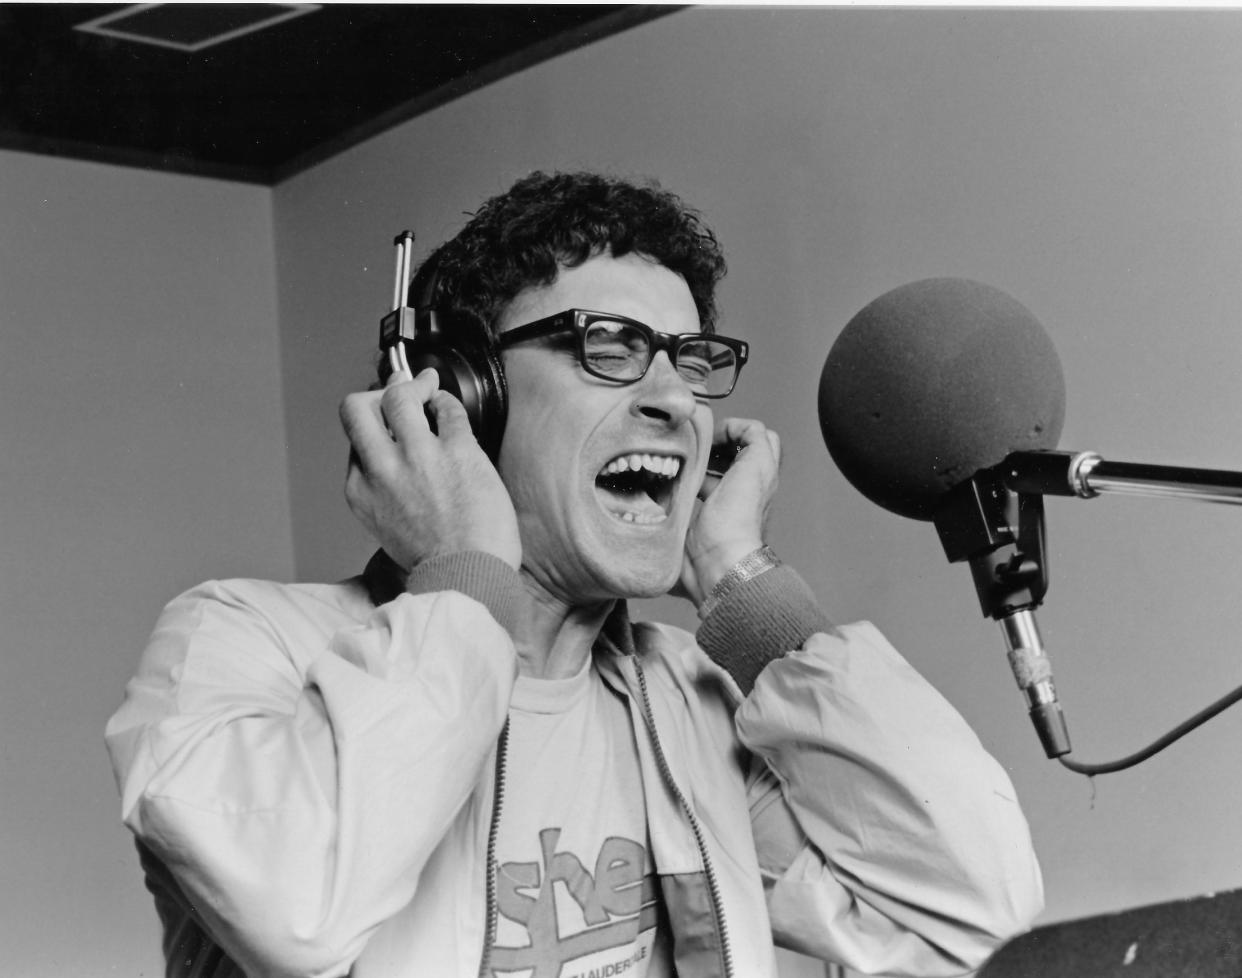 Donnie Iris lets loose with one of his patented screams during a 1987 recording session.